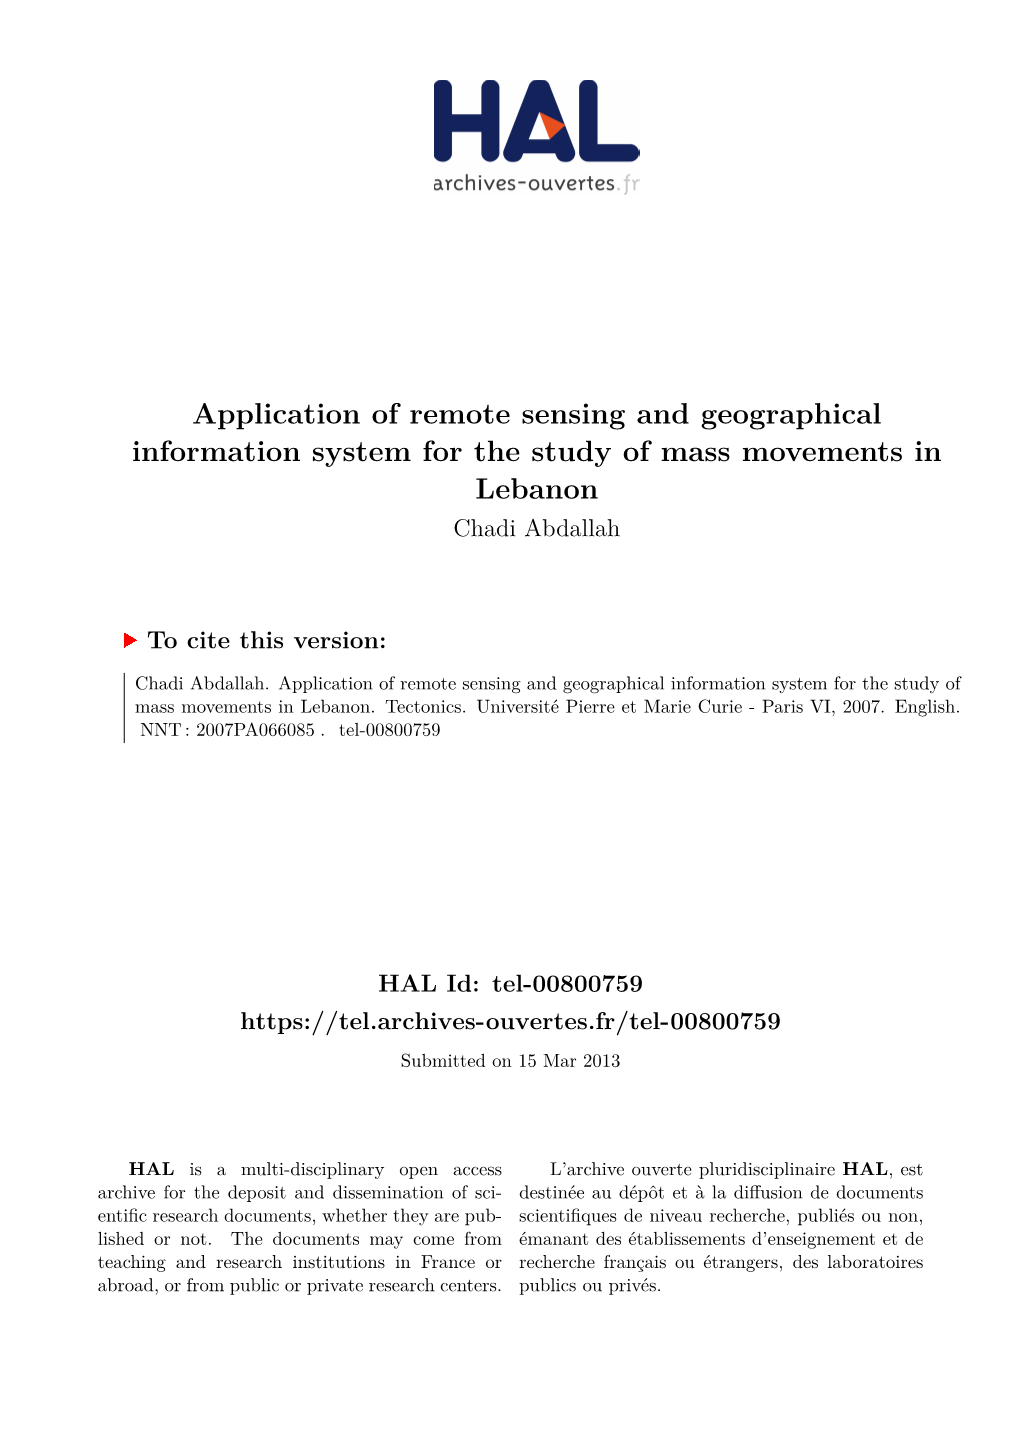 Application of Remote Sensing and Geographical Information System for the Study of Mass Movements in Lebanon Chadi Abdallah